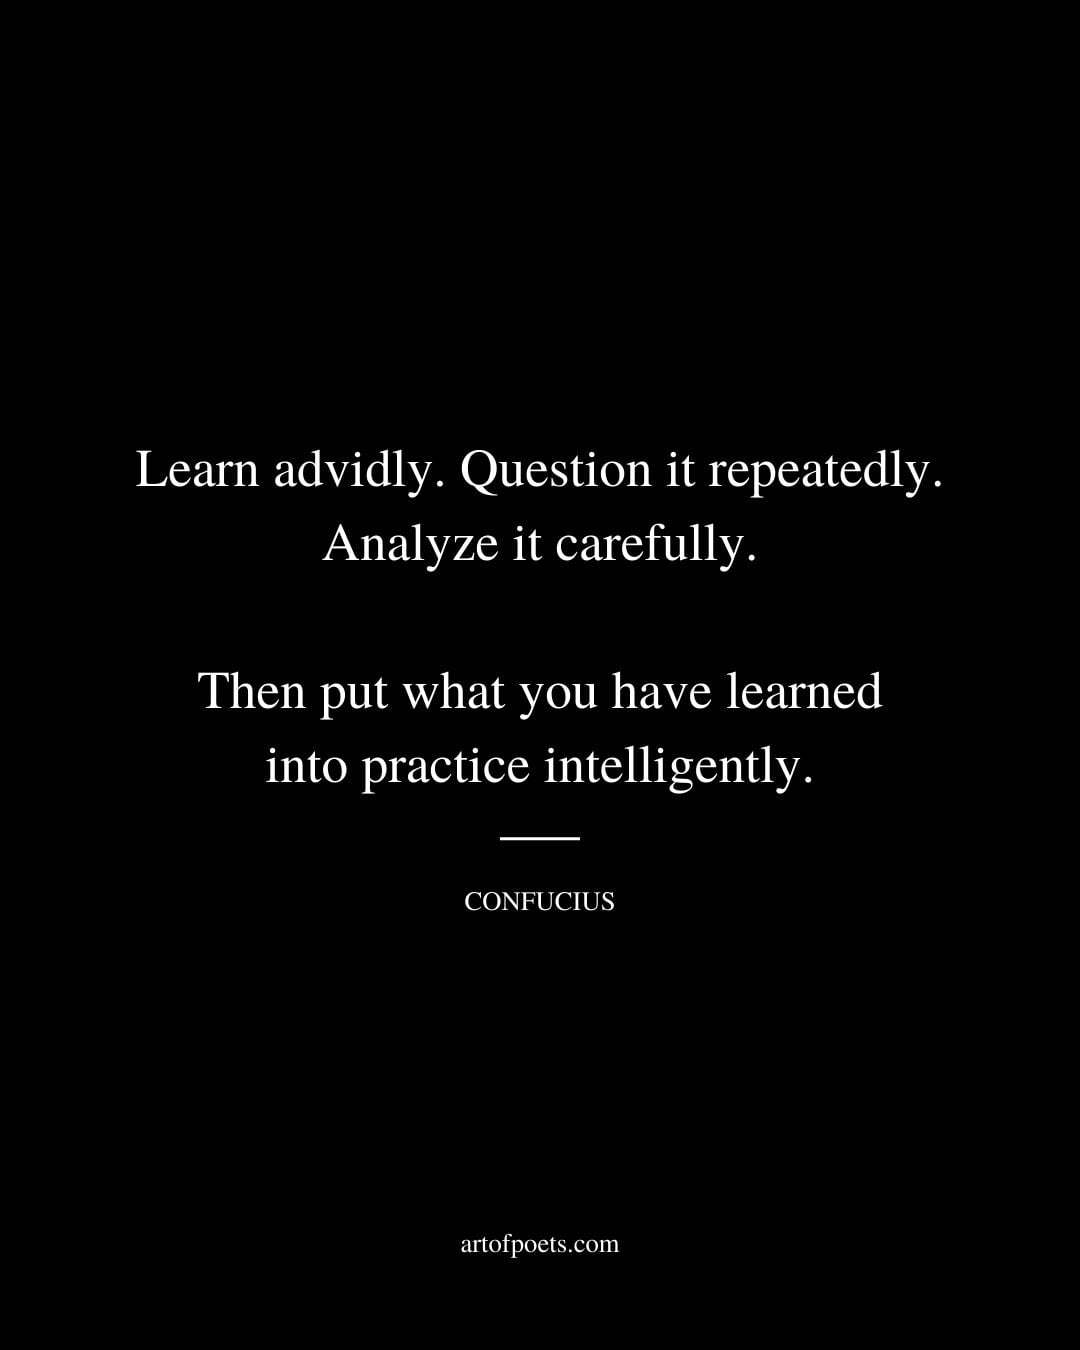 Learn advidly. Question it repeatedly. Analyze it carefully. Then put what you have learned into practice intelligently